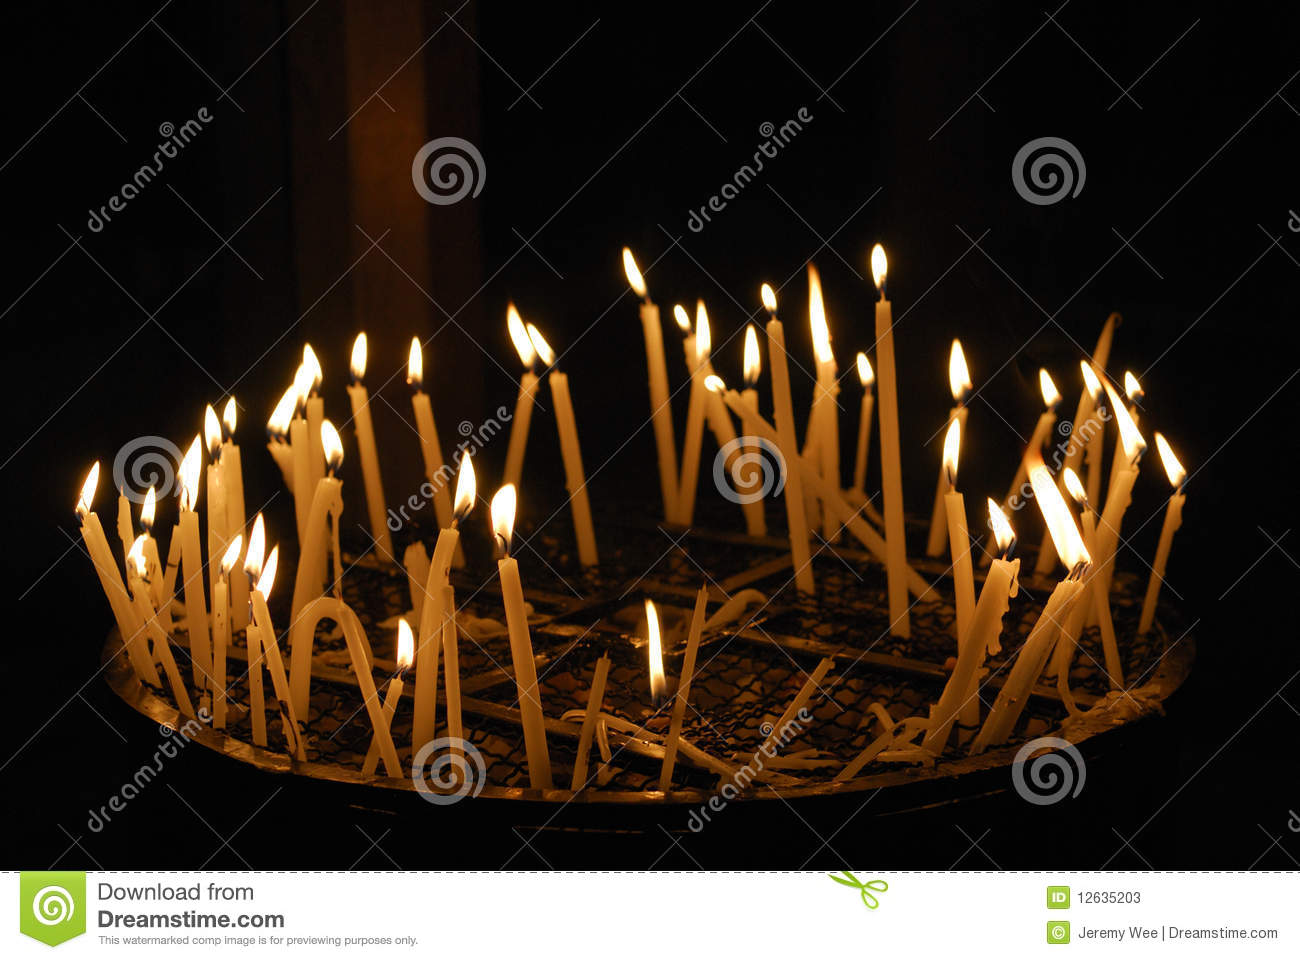 More Similar Stock Images Of   Burning Candles In A Church